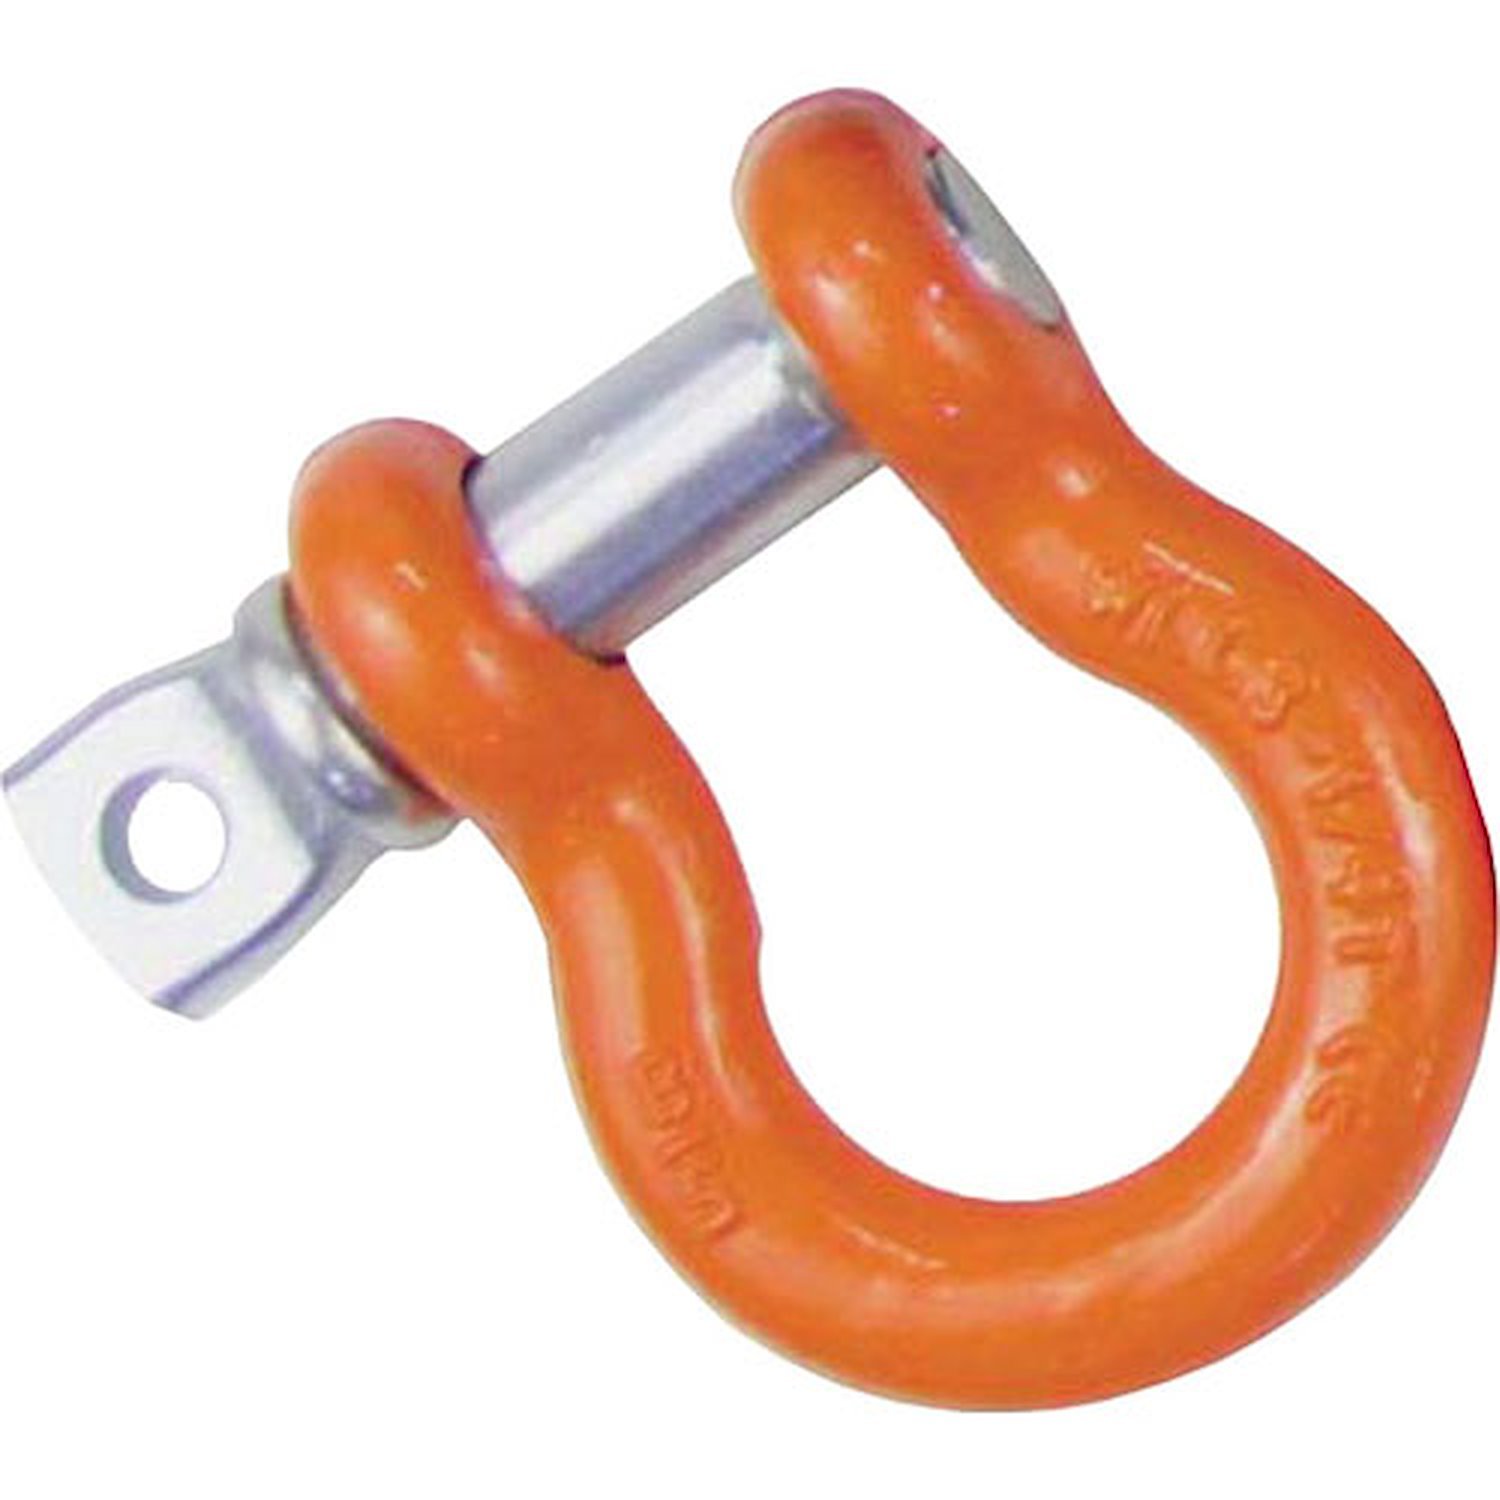 Powdercoated 3/4" Shackle 4.75 Ton Load Limit